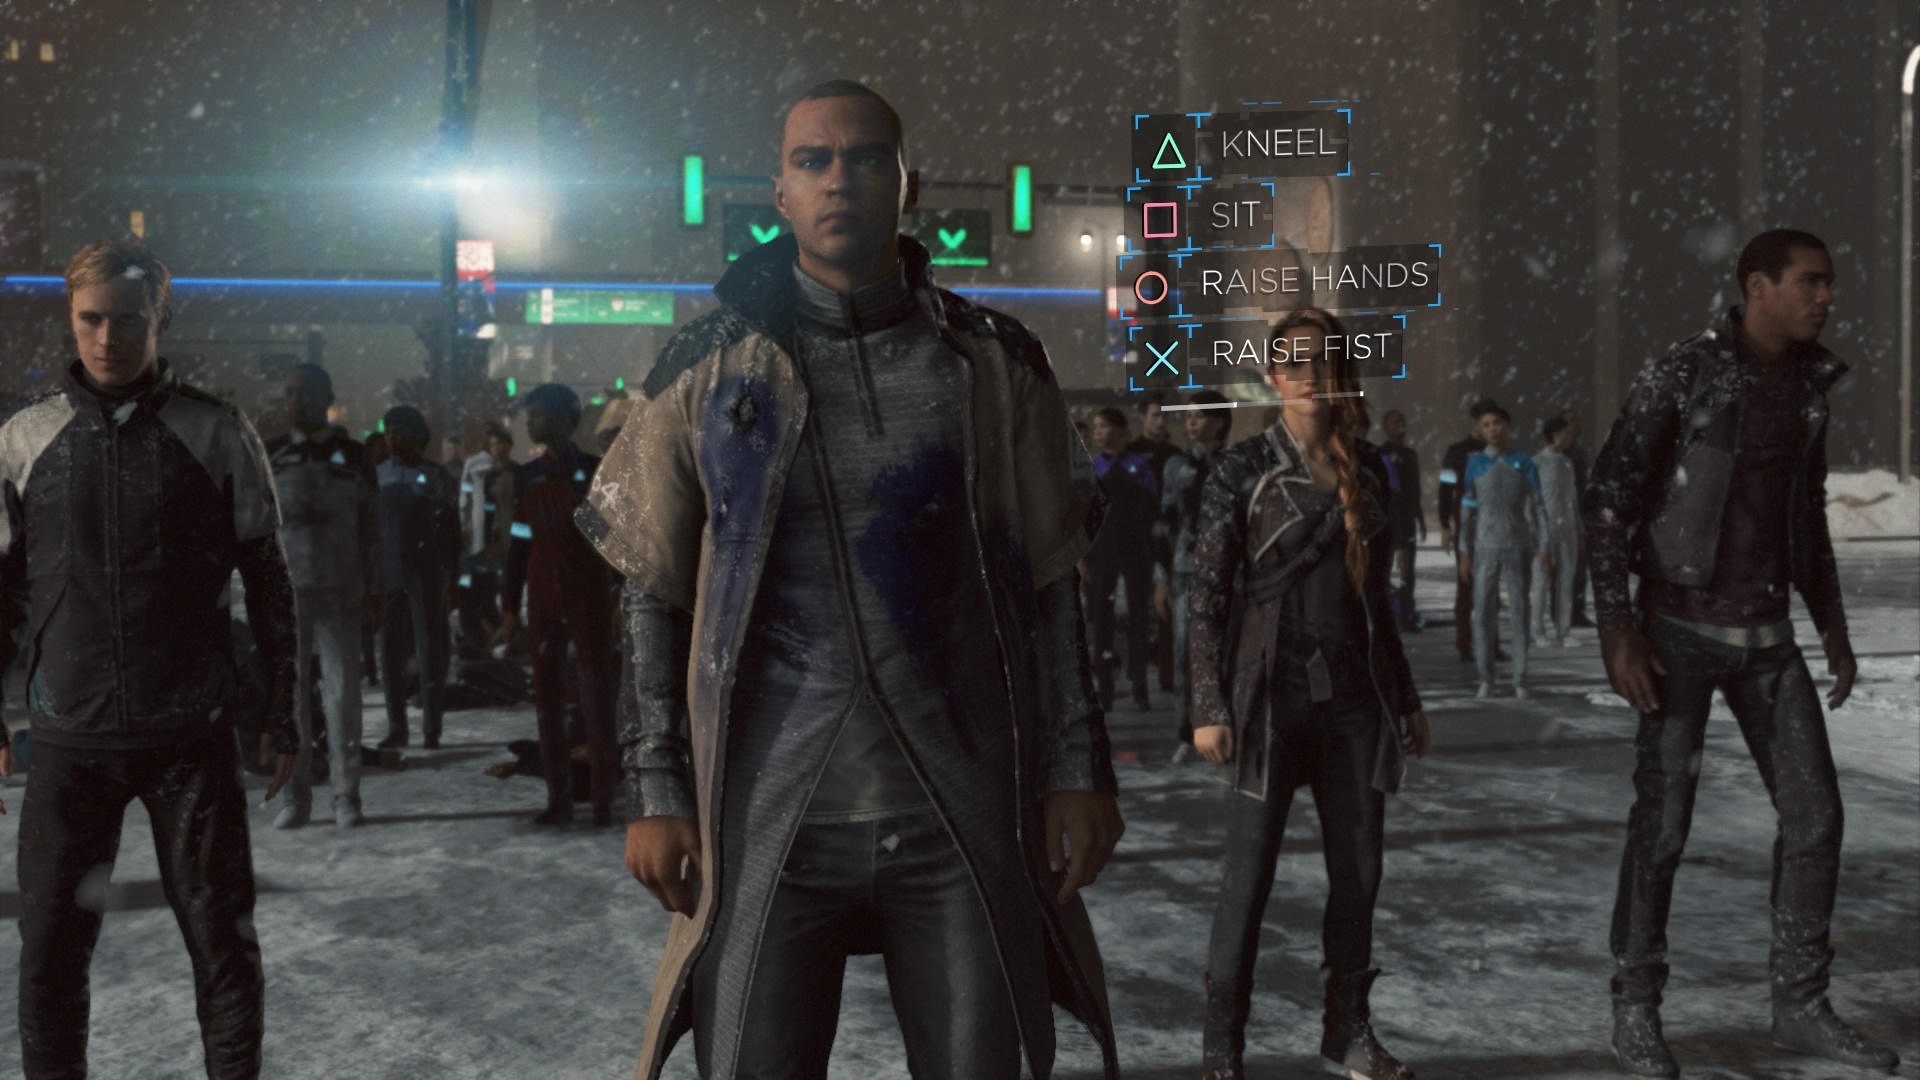 Detroit Become Human - Connor walking away Mission Successful